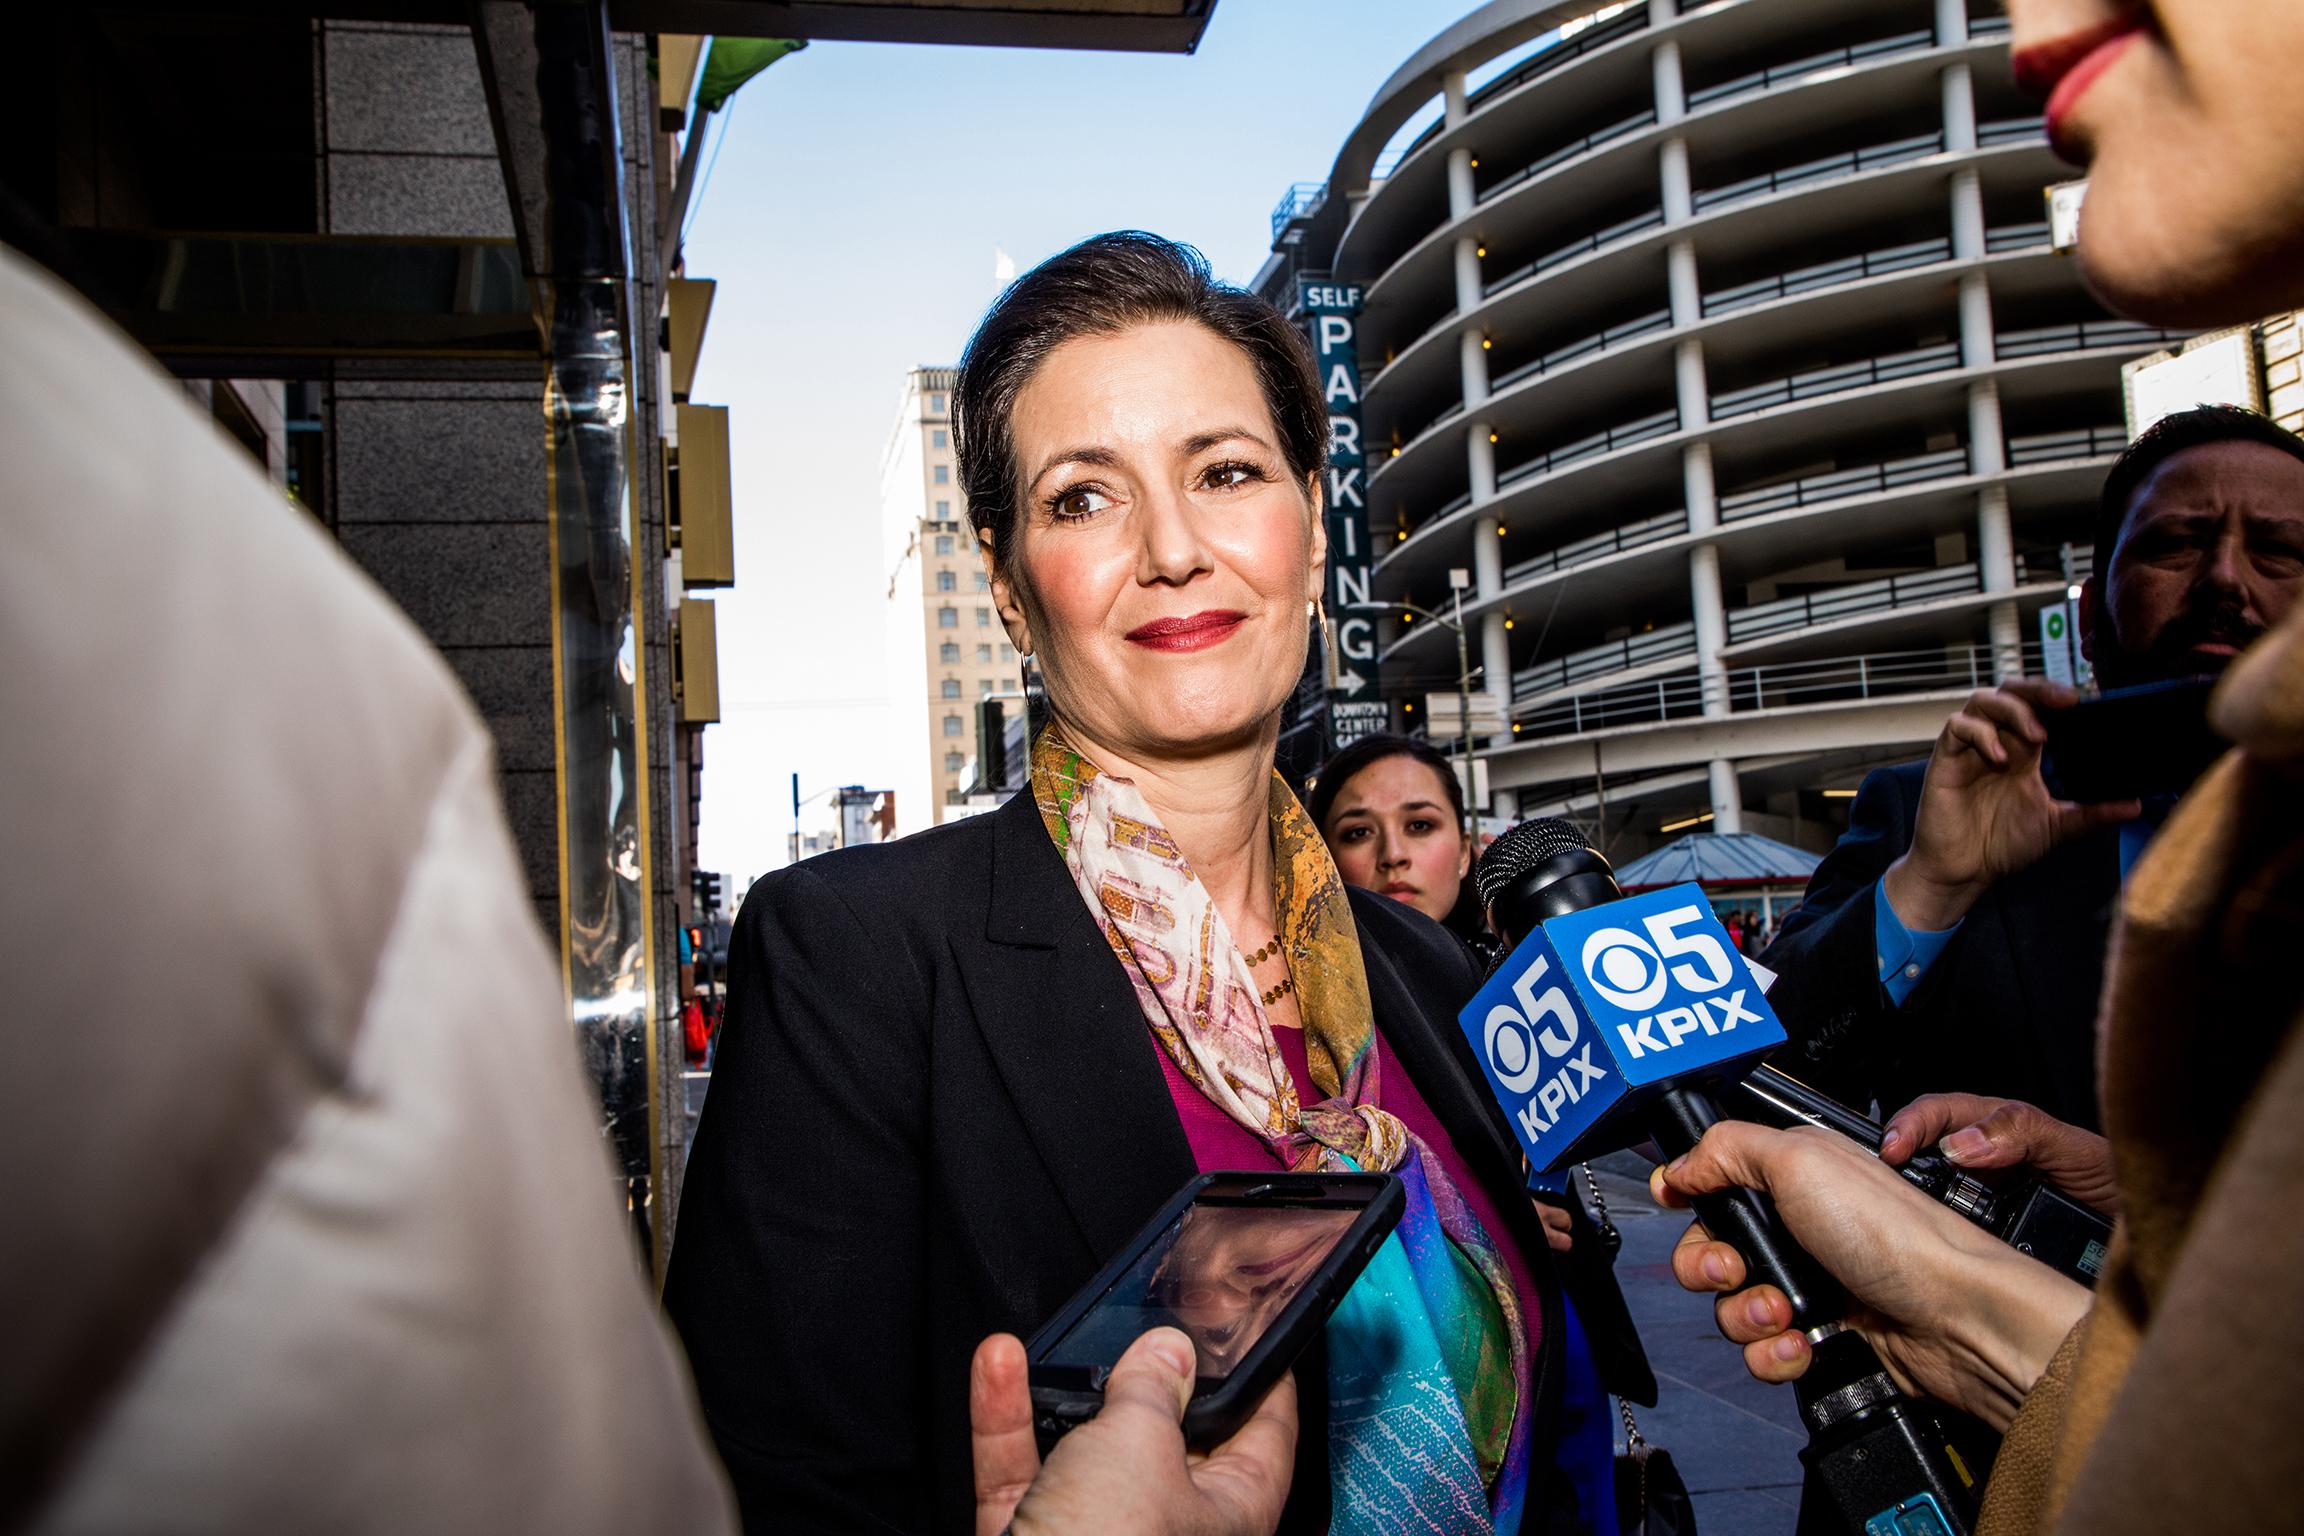 Oakland Mayor Libby Schaaf outraged the White House by warning her city about an impending immigration roundup (Christie Hemm Klok)